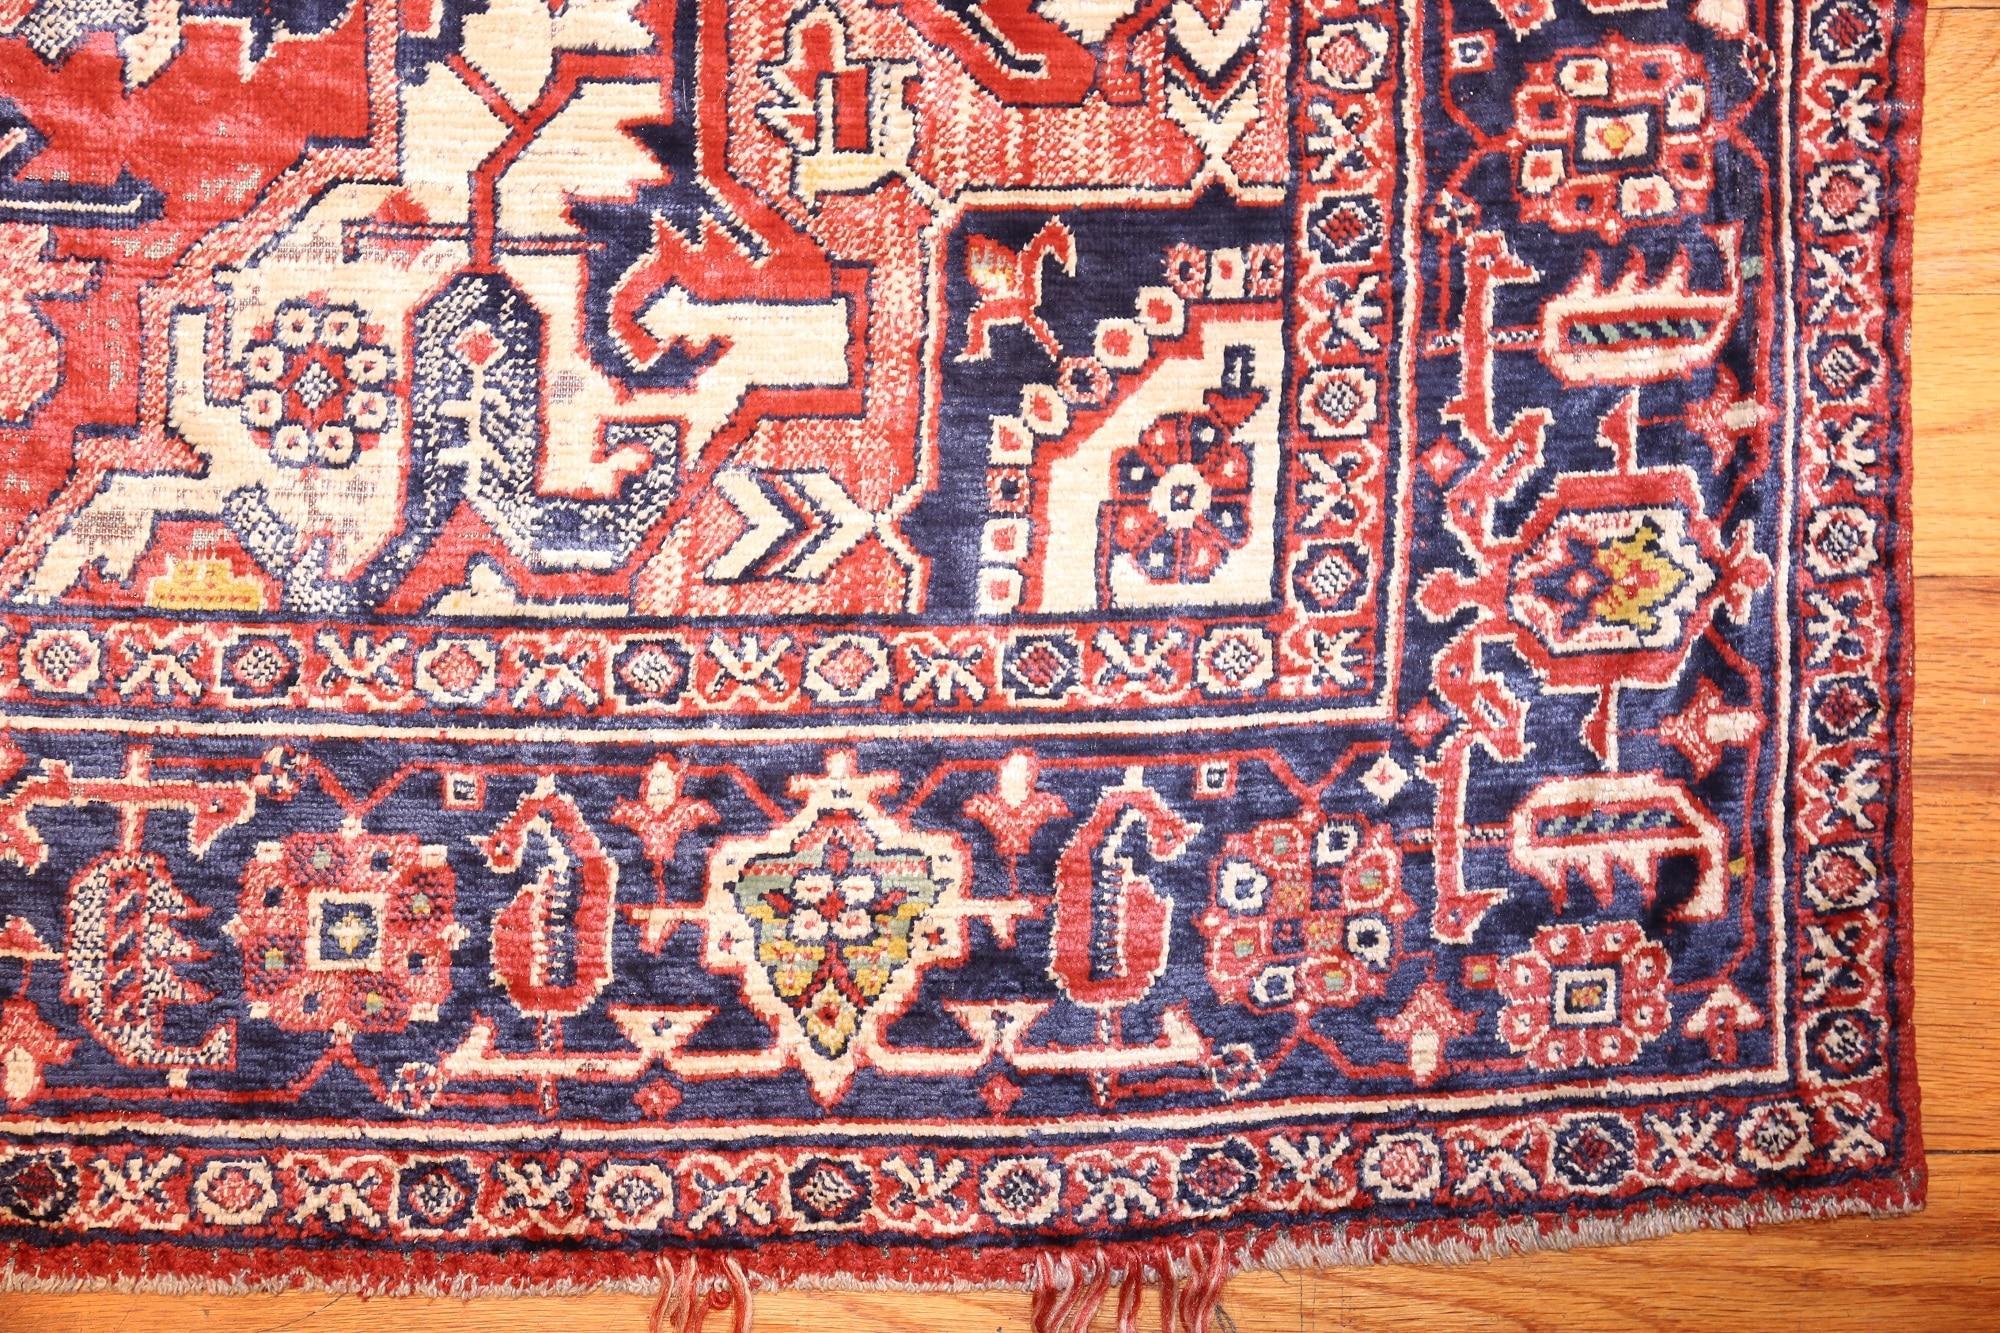 Serapi Antique American Chenille Rug. Size: 4 ft 7 in x 6 ft (1.4 m x 1.83 m)